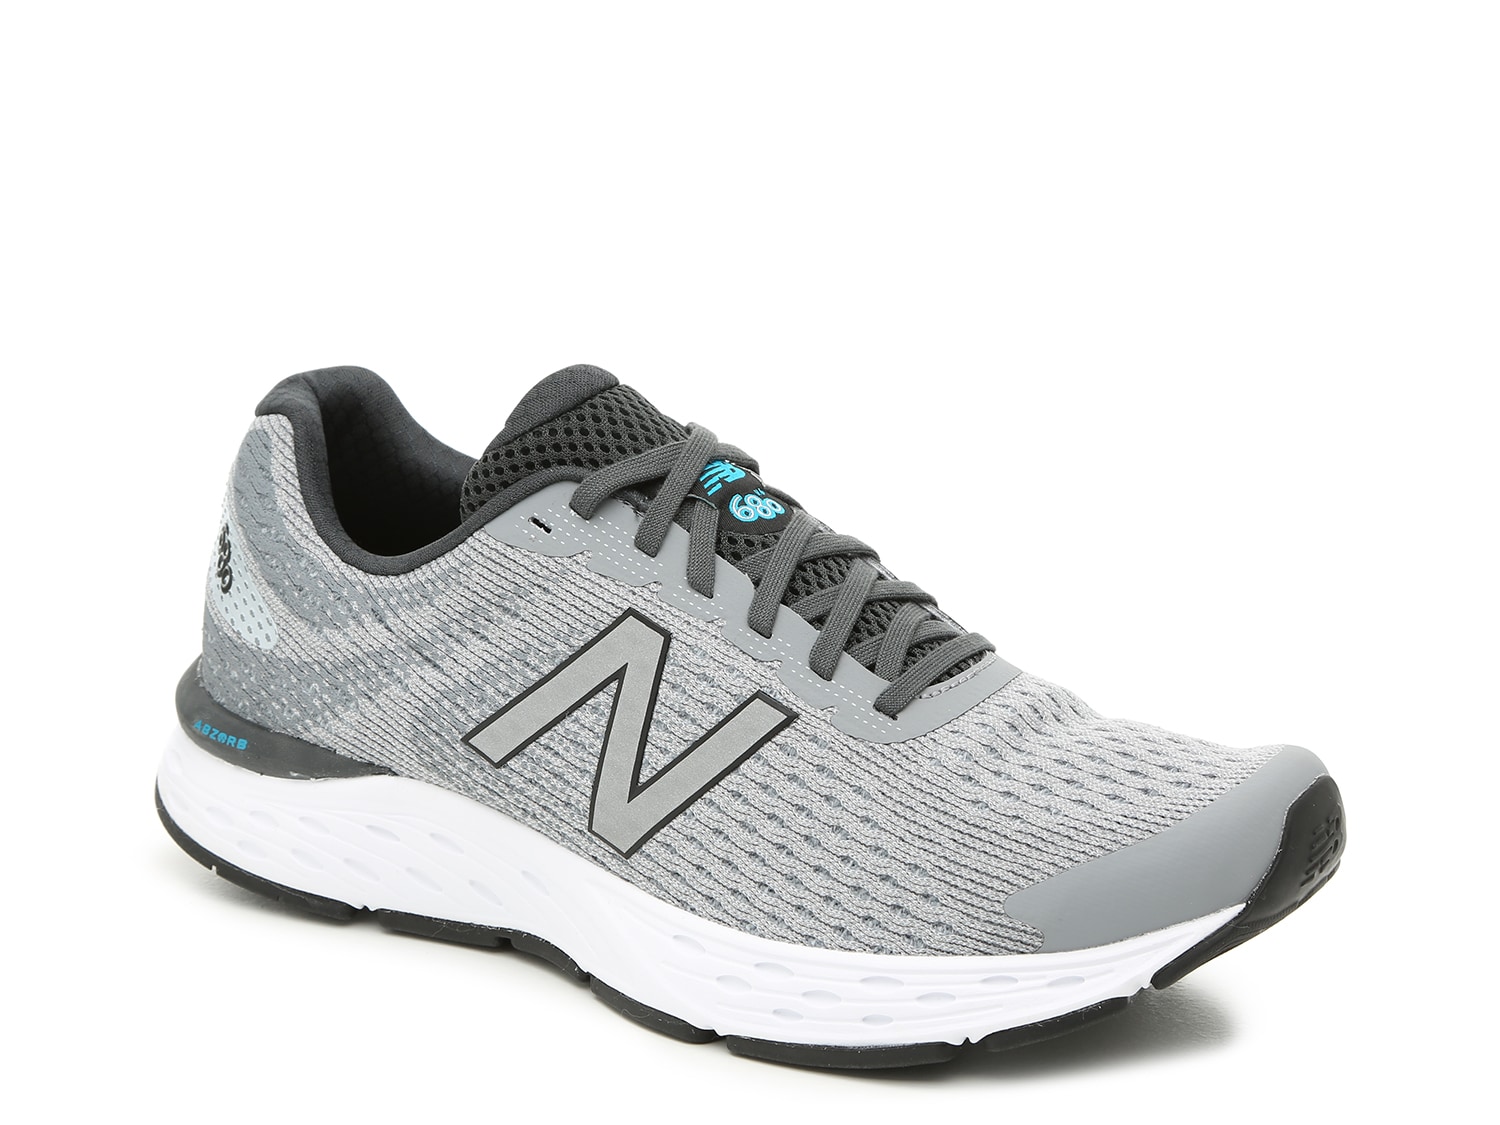 new balance m680 review